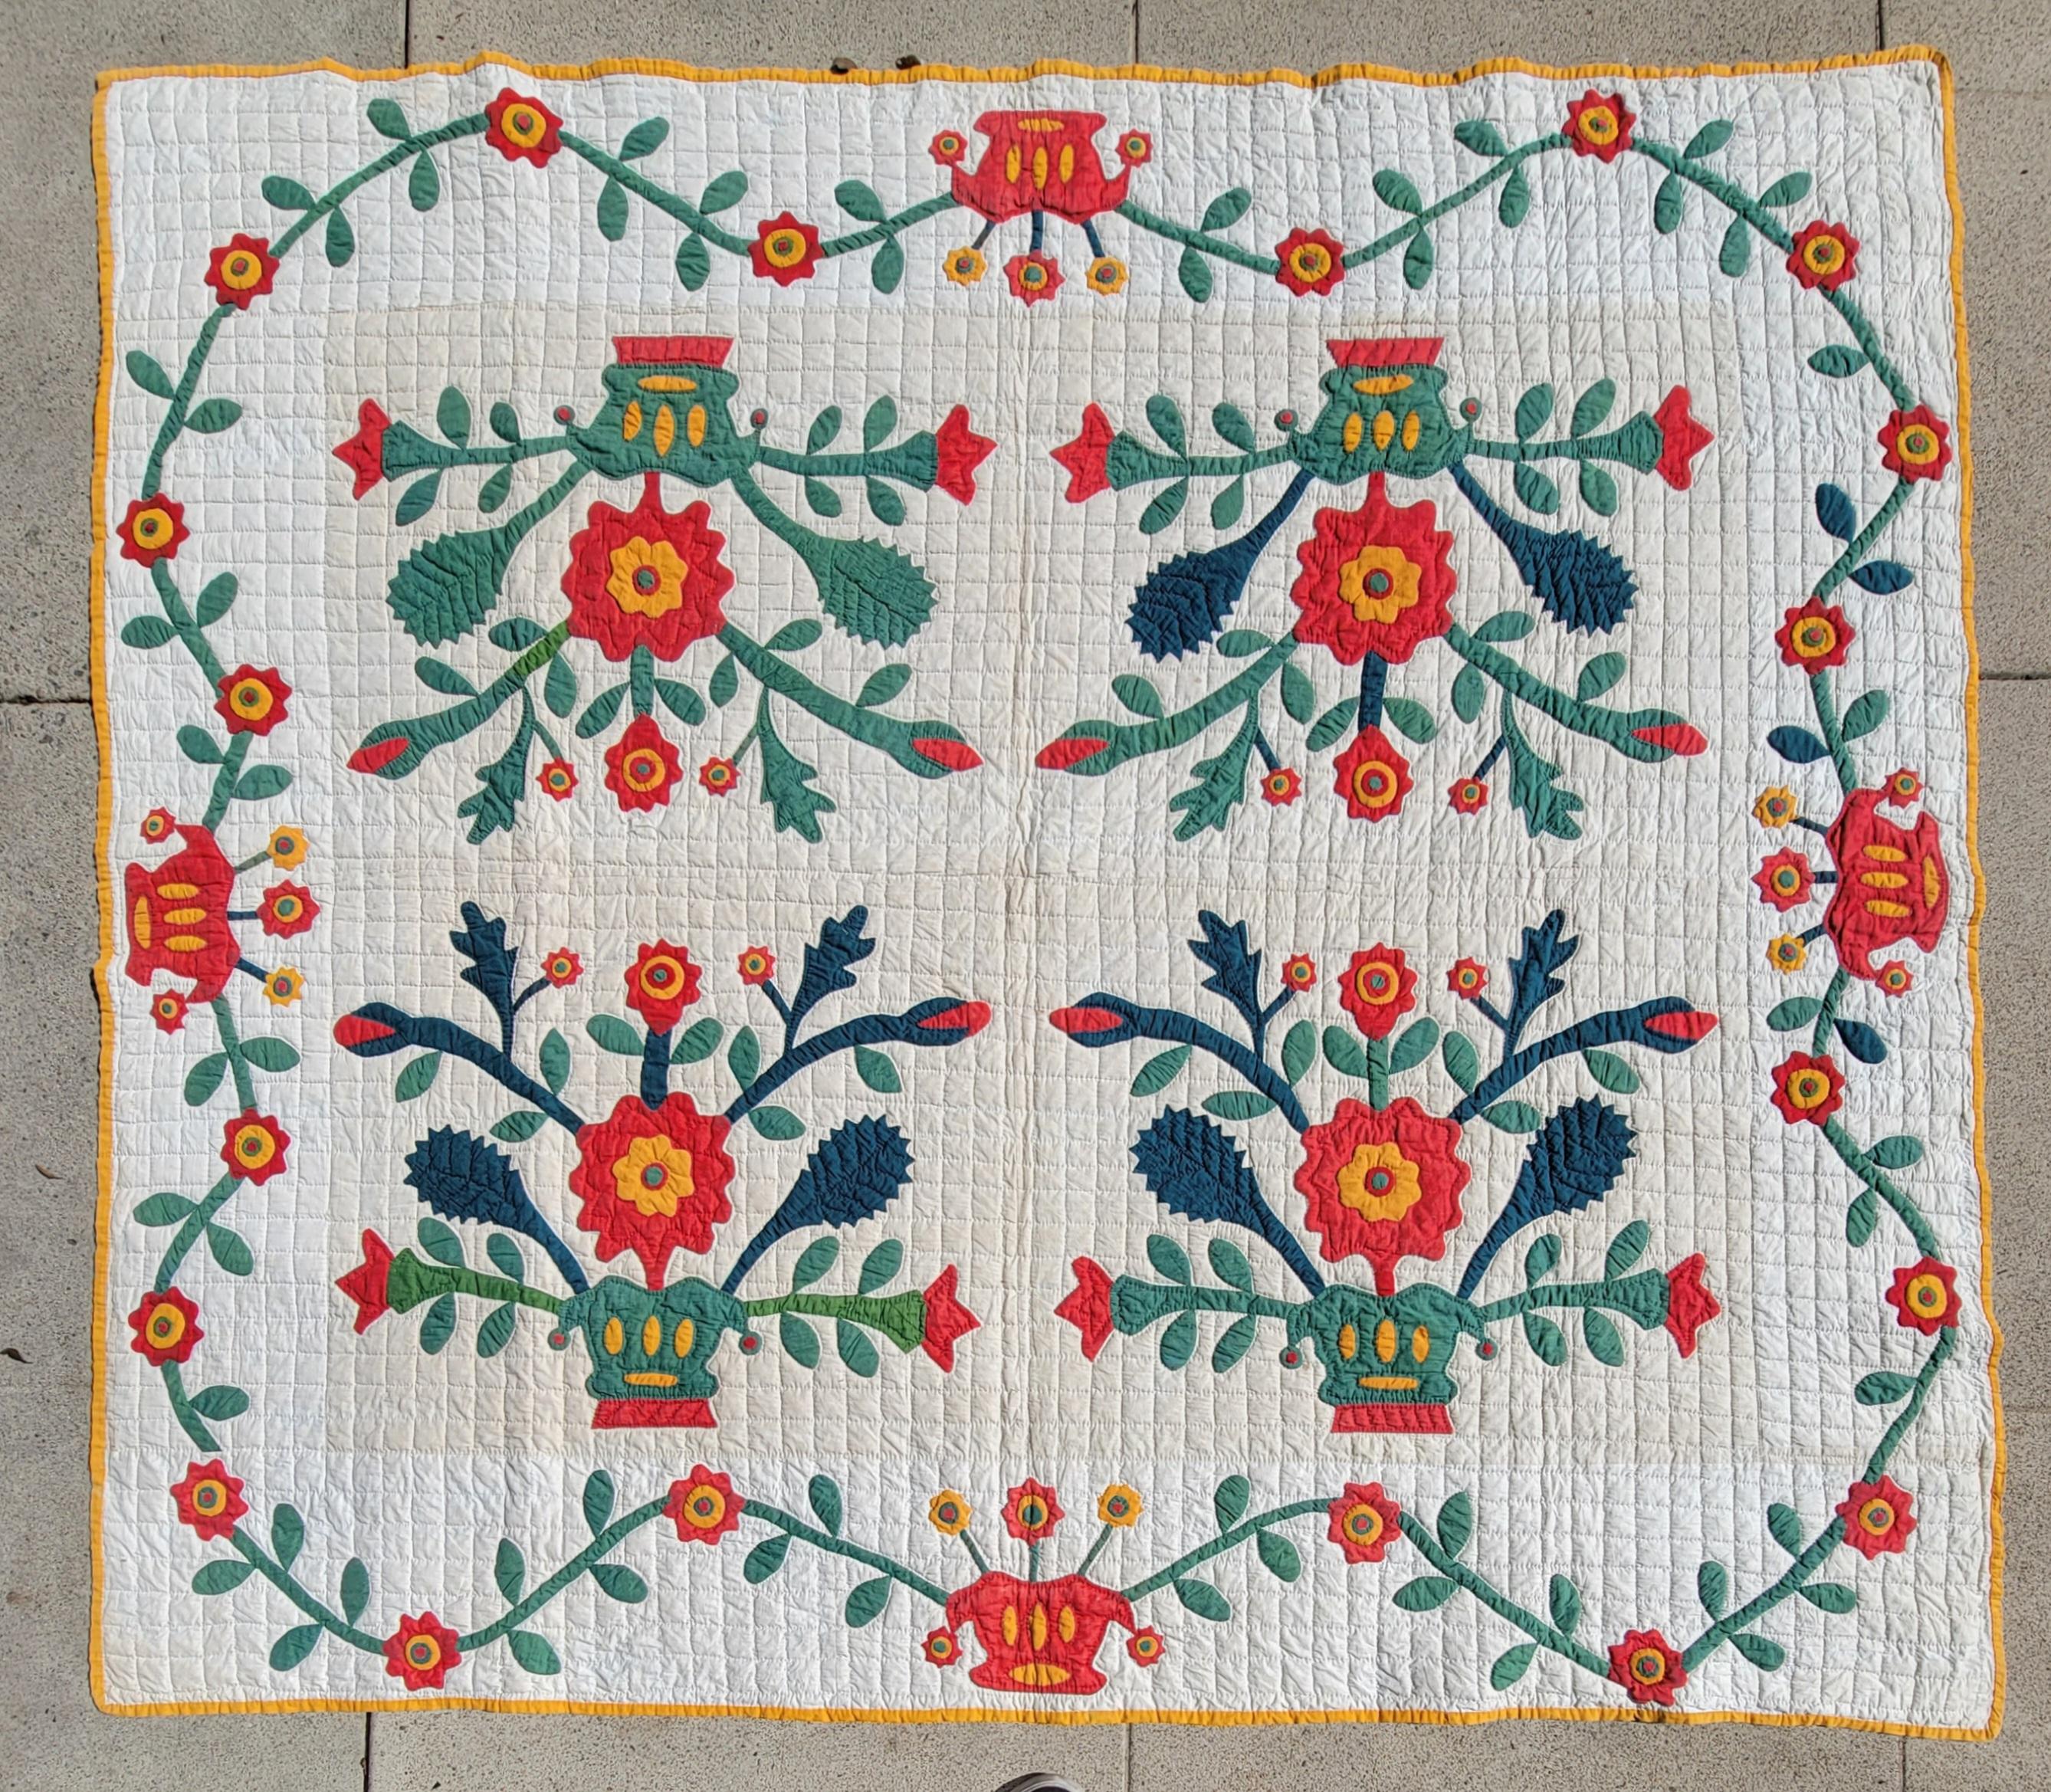 19th C Applique quilt from Pennsylvania in good condition with swag floral border.This is quite unusual and unique.